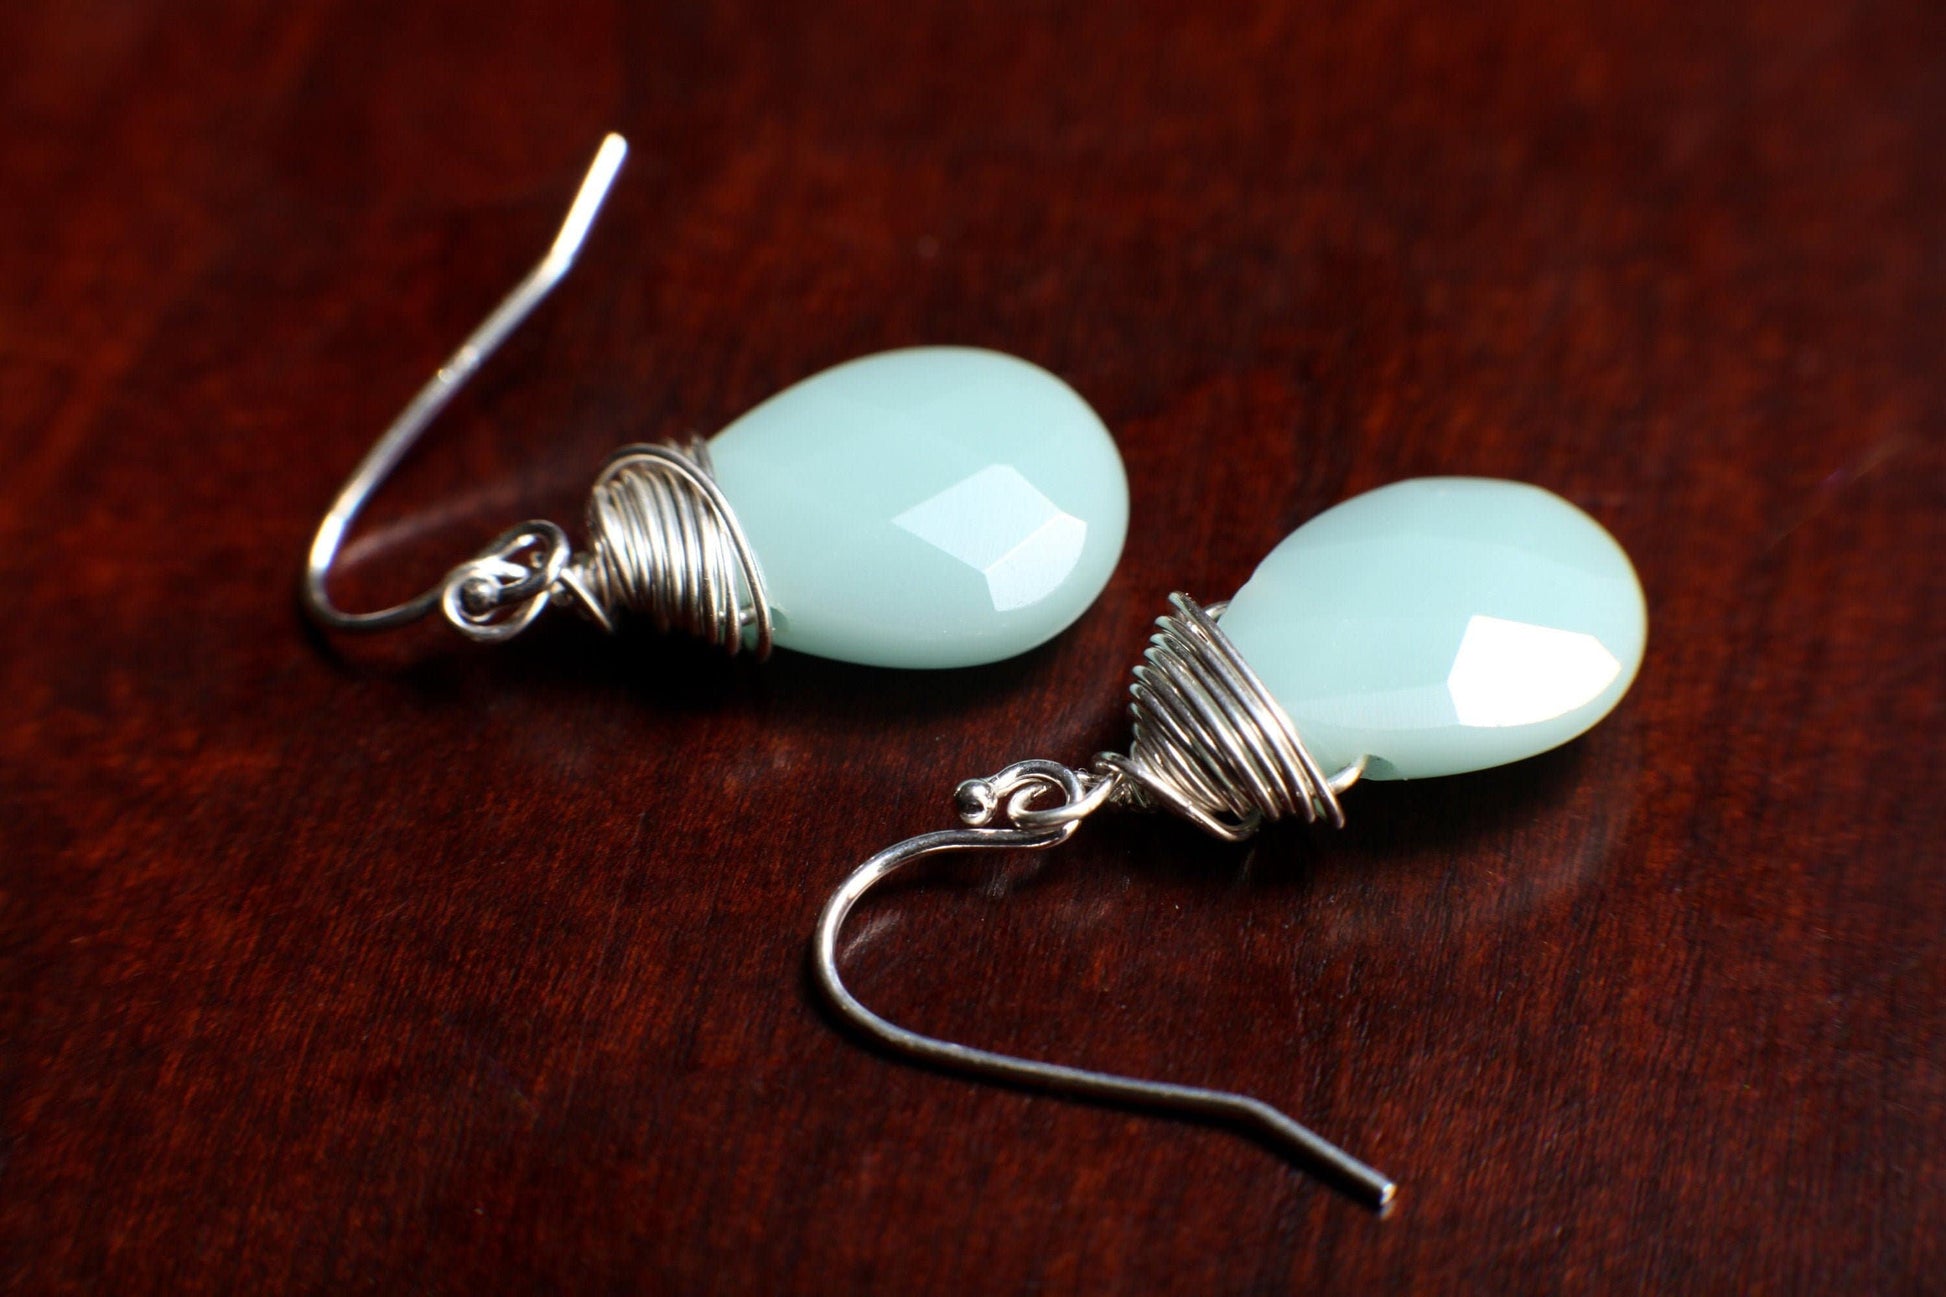 Natural Amazonite Heart Pear 12x16mm Drop Wire Wrapped Earring, Dangling Ammonite in 925 Sterling Silver Ear Wire, Soothing Earring